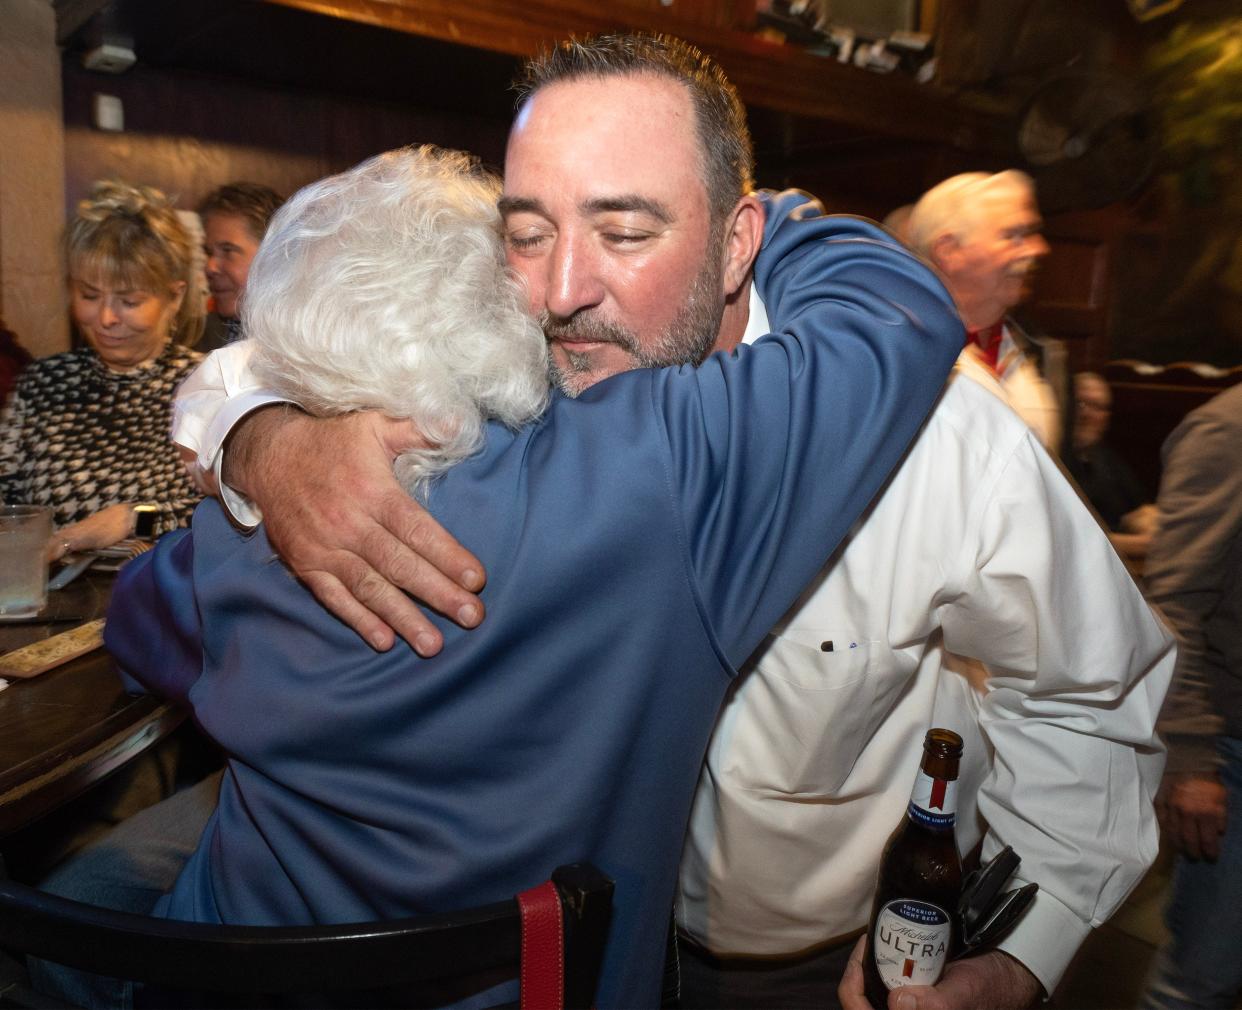 William V. Sherer II is congratulated by longtime family friend Nikki Ardelea at the Conestoga Grill in downtown Canton Tuesday. Sherer has been elected Canton's new mayor, unofficial election results show.